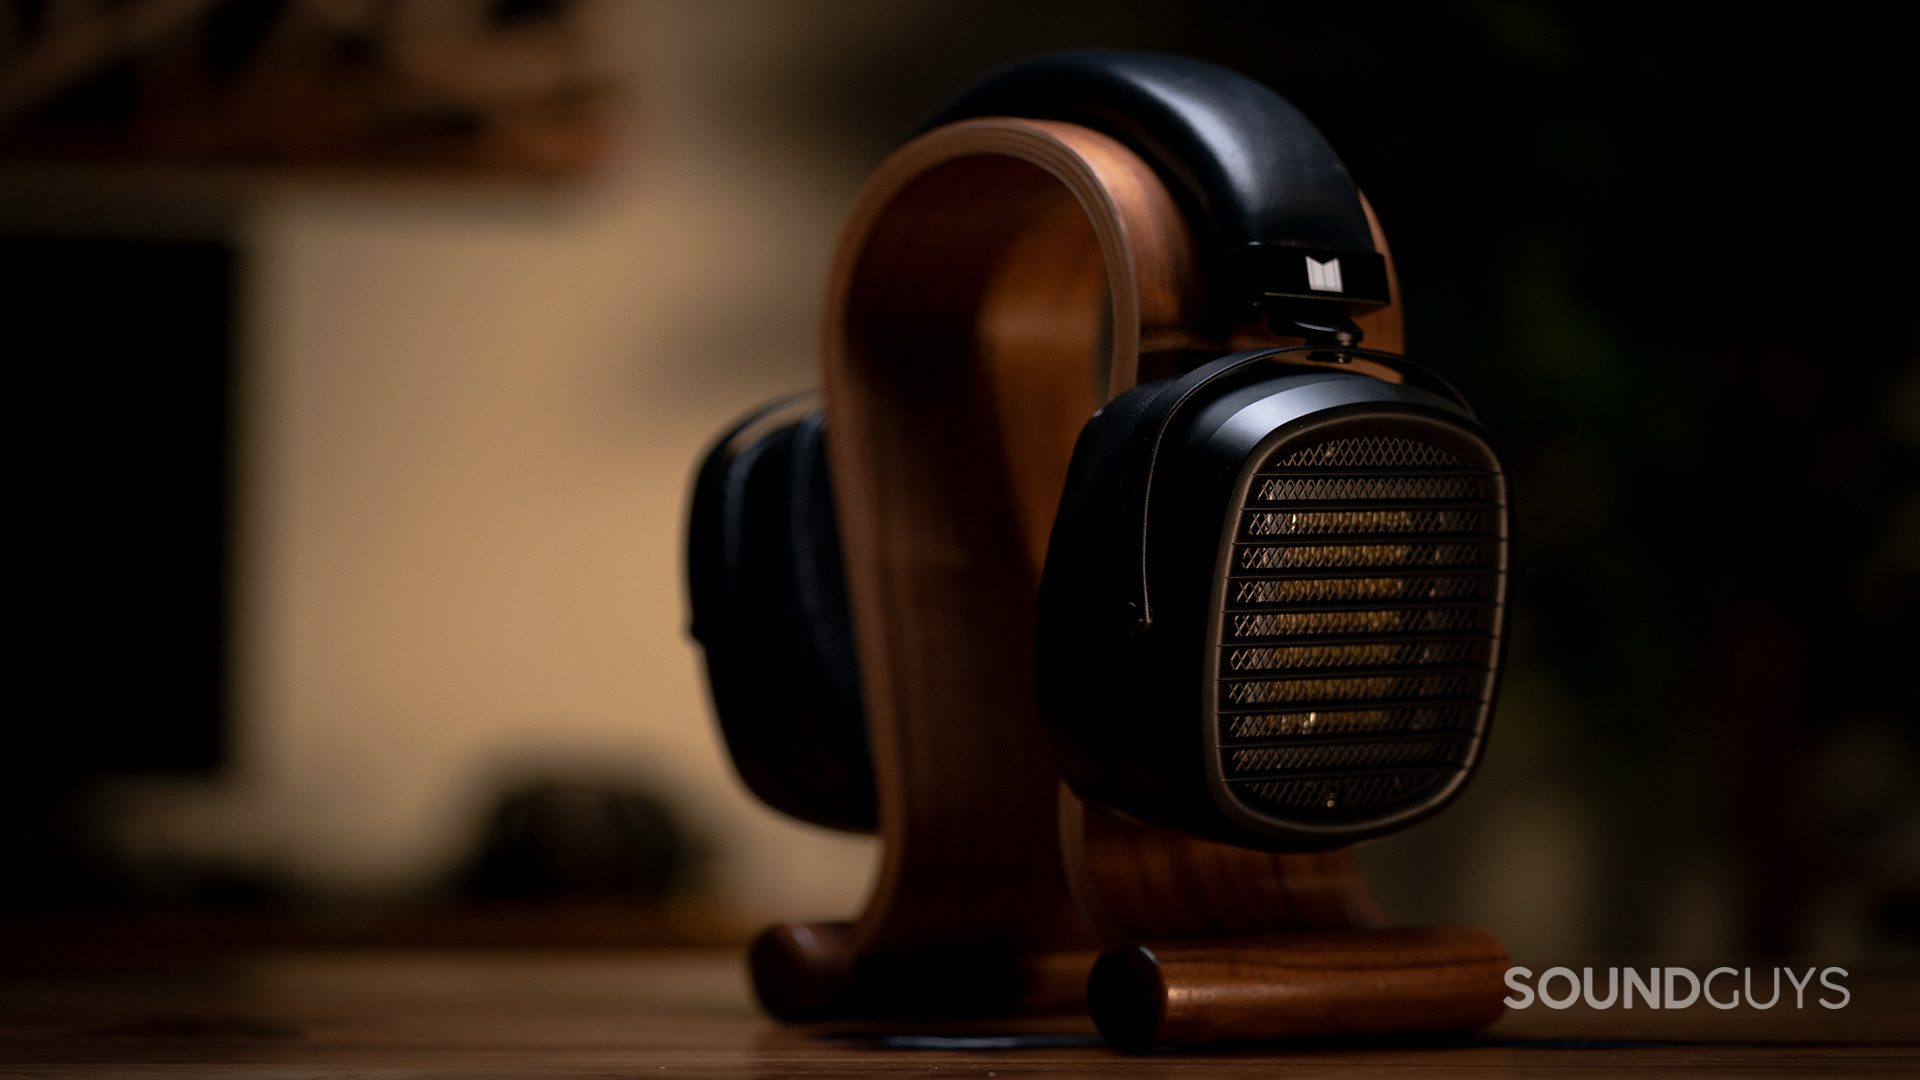 The Monolith by Monoprice AMT headphones on an Omega stand.